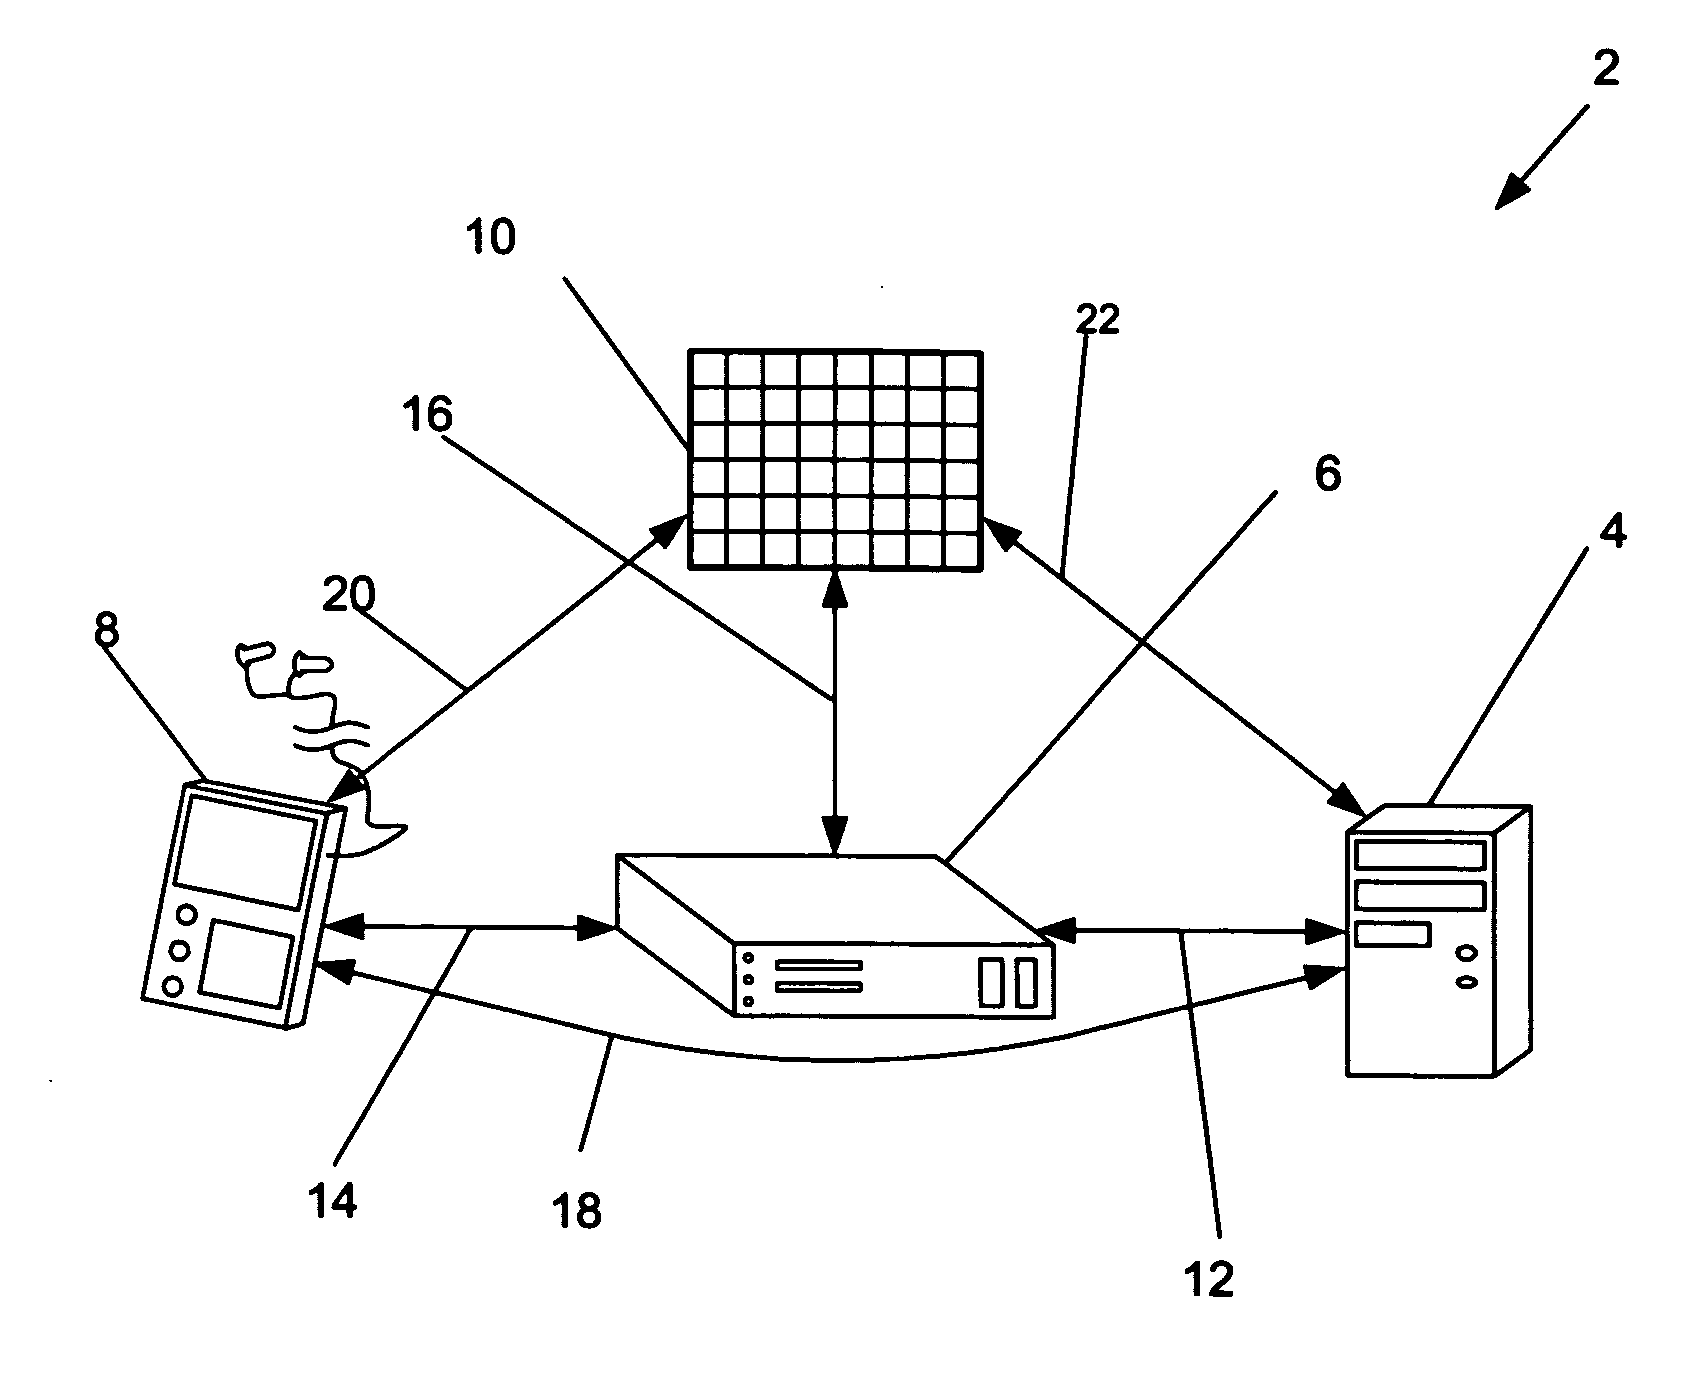 Aural rehabilitation system and a method of using the same